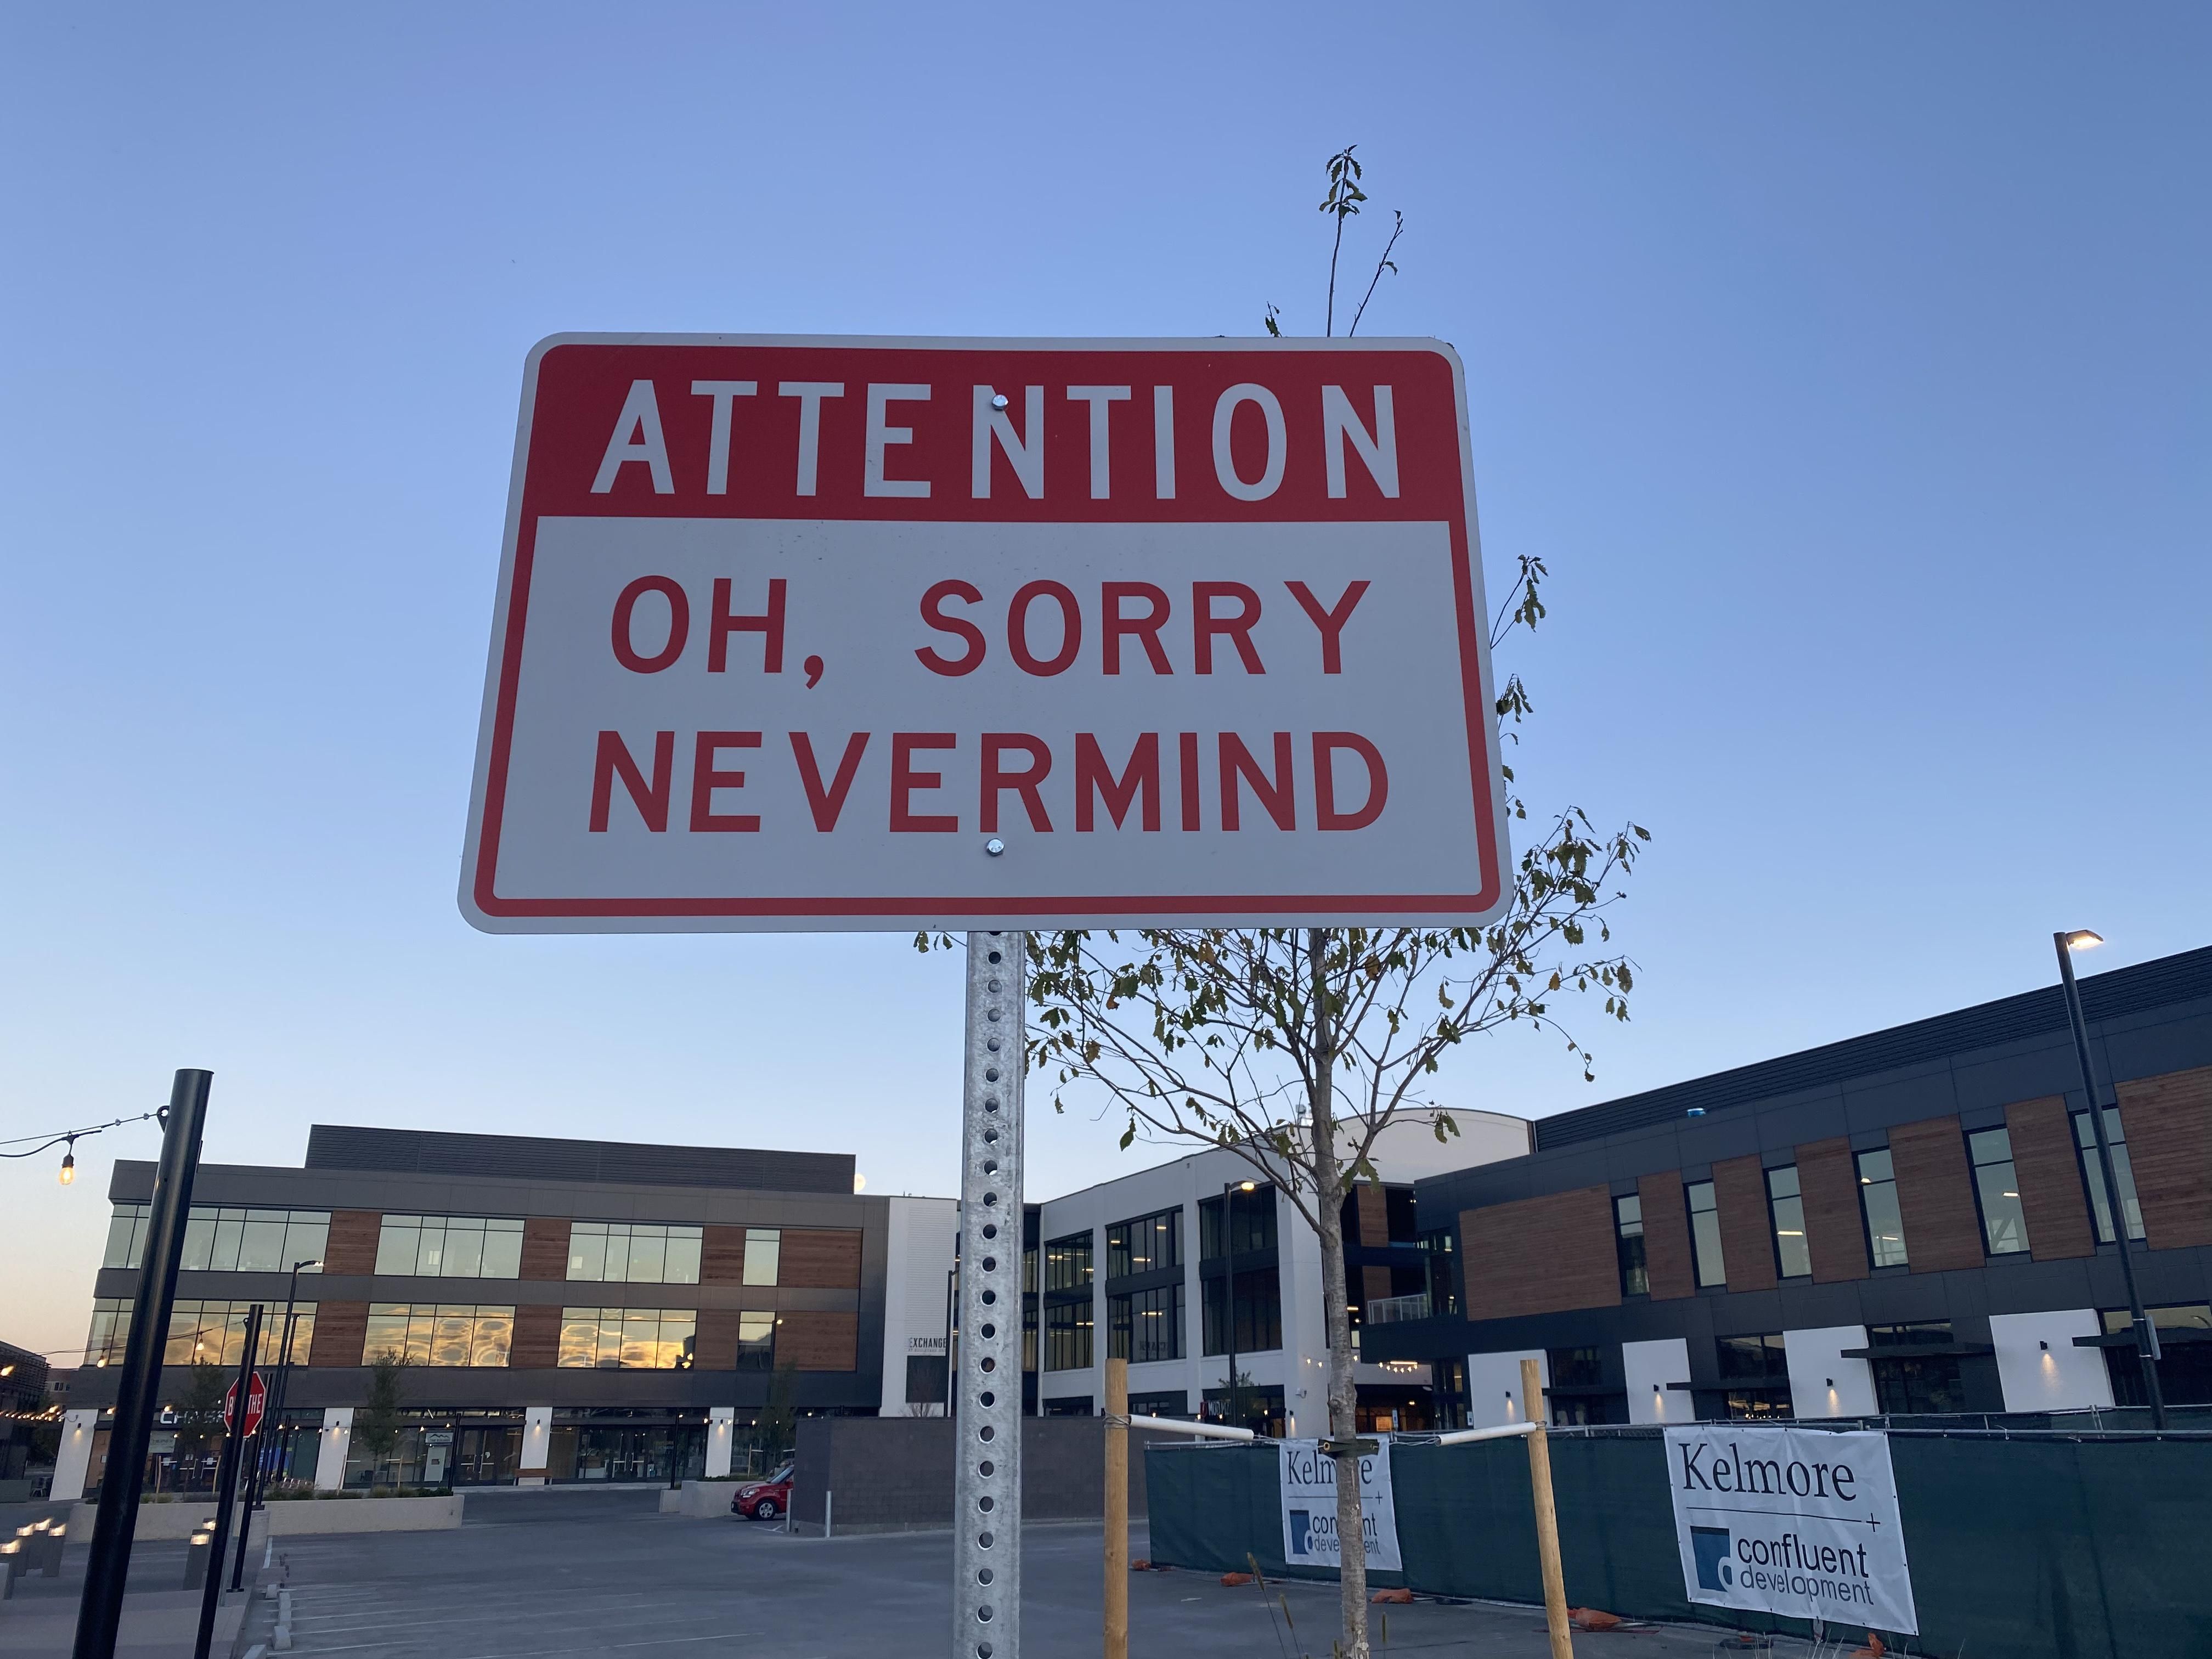 Real sign at a new development in Denver